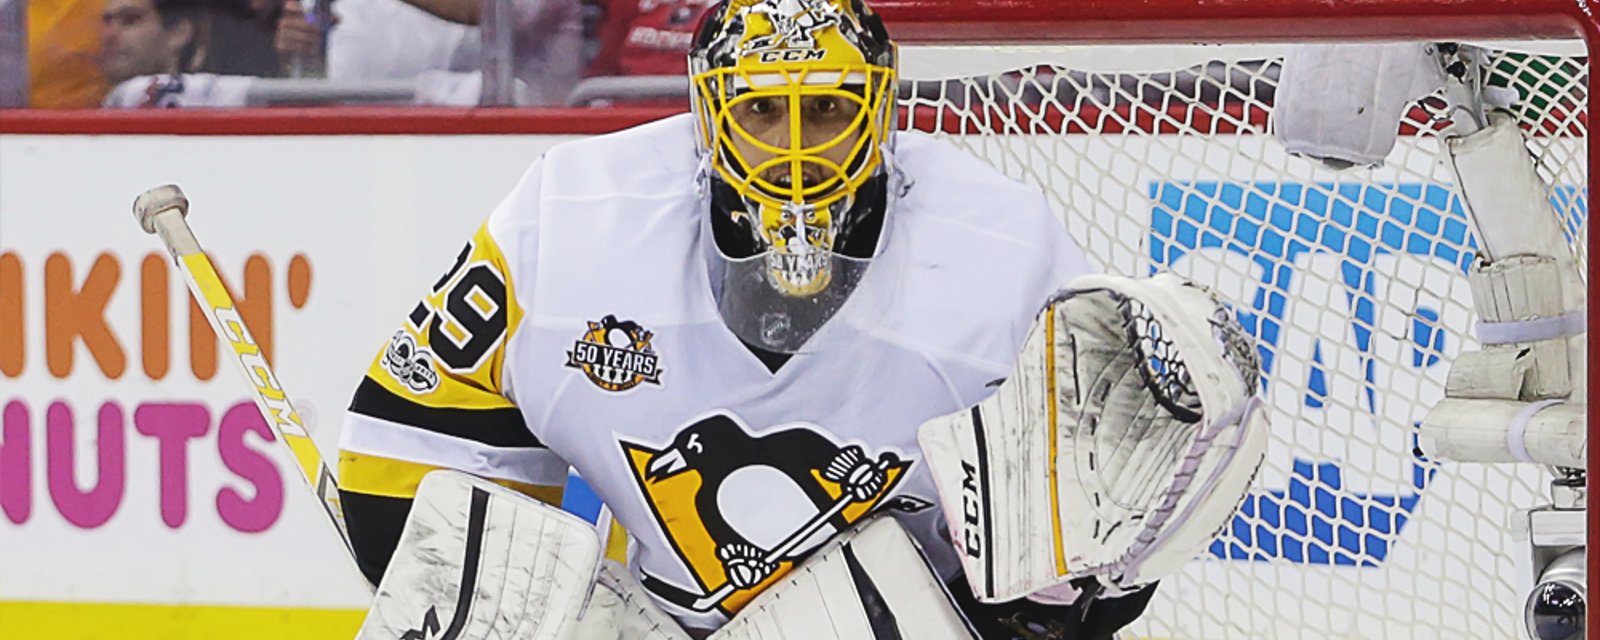 Rumor: Major plot twists expected in the Marc-Andre Fleury’s case? 